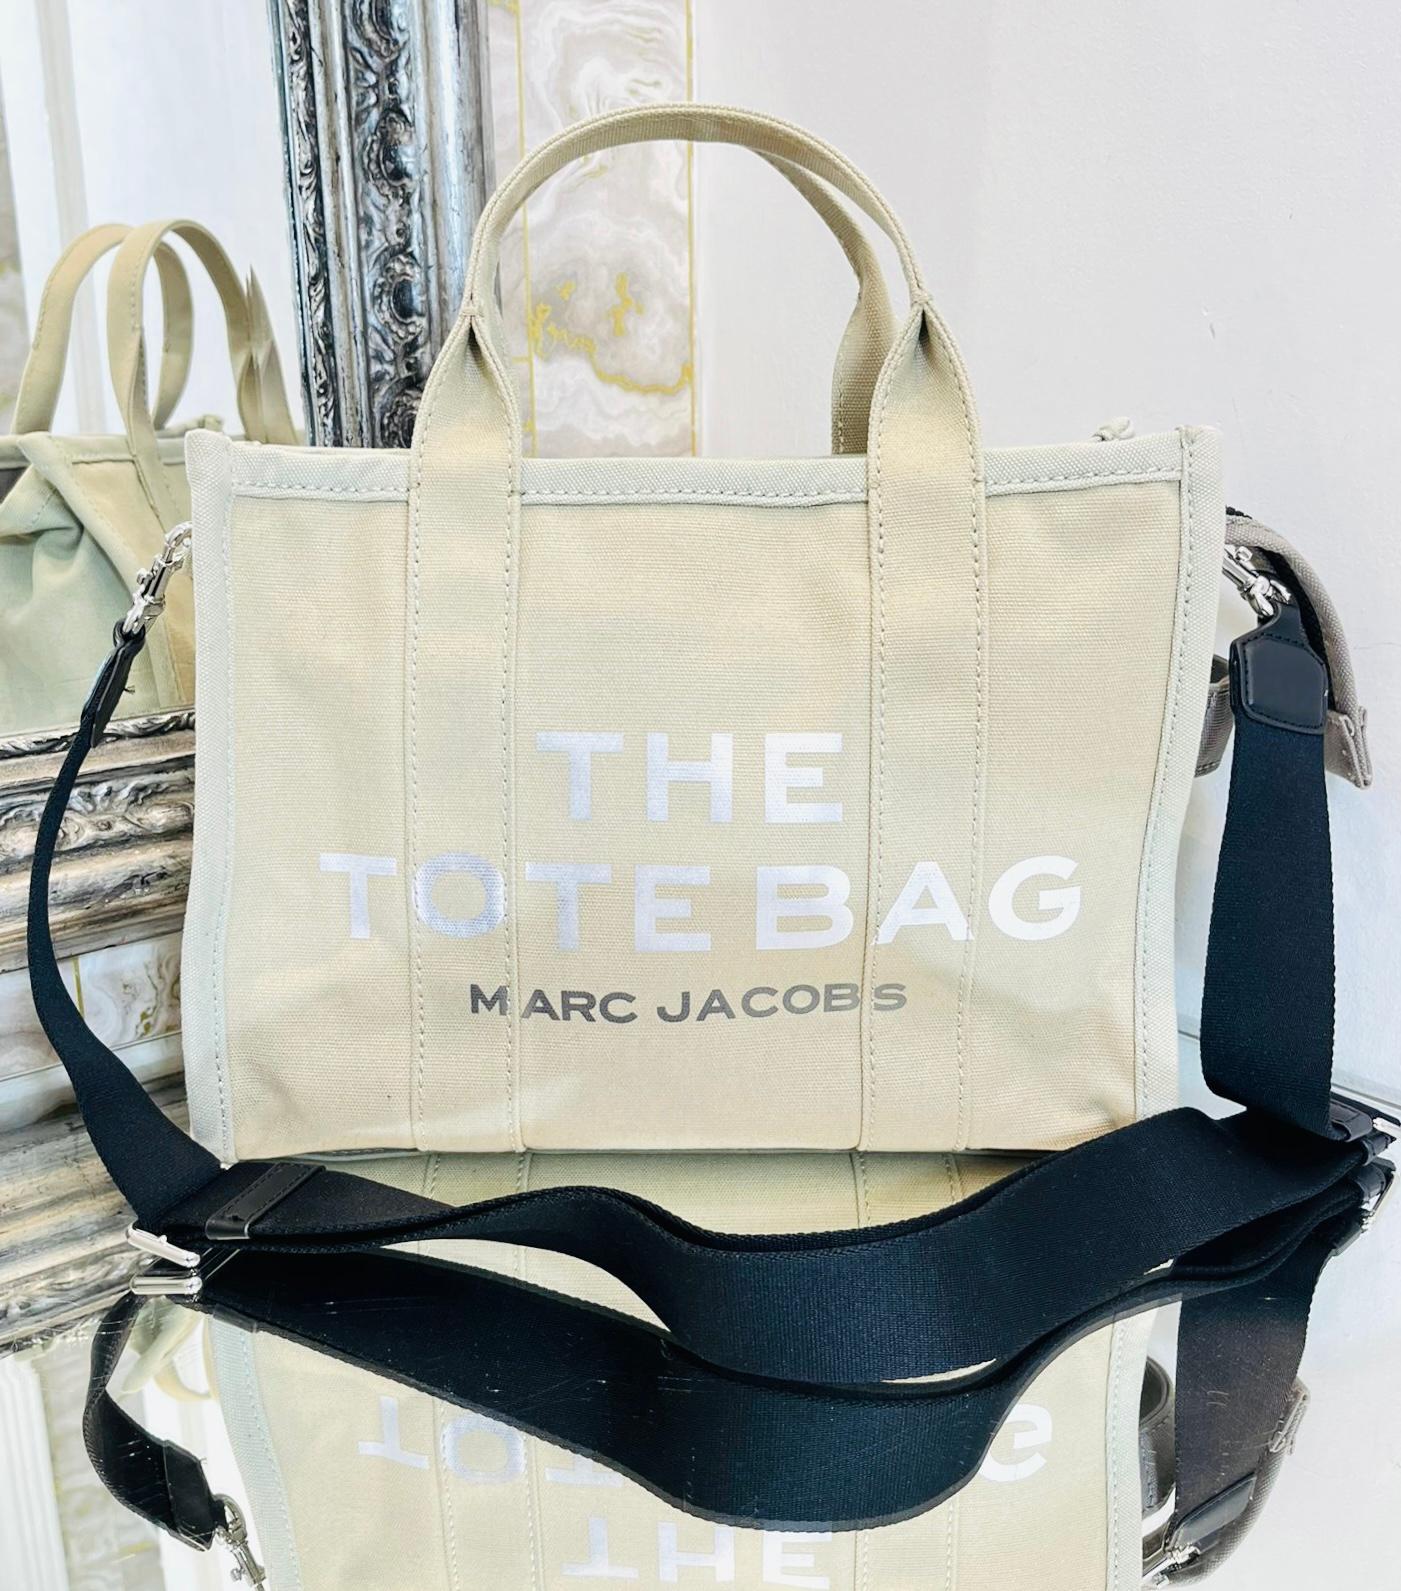 Marc Jacobs Canvas Tote Bag

Beige rectangle shaped tote bag designed with white 'The Tote Bag' inscription to the front.

Featuring dual top handle and detachable, adjustable black shoulder strap.

Styled with top zip closure leading to spacious